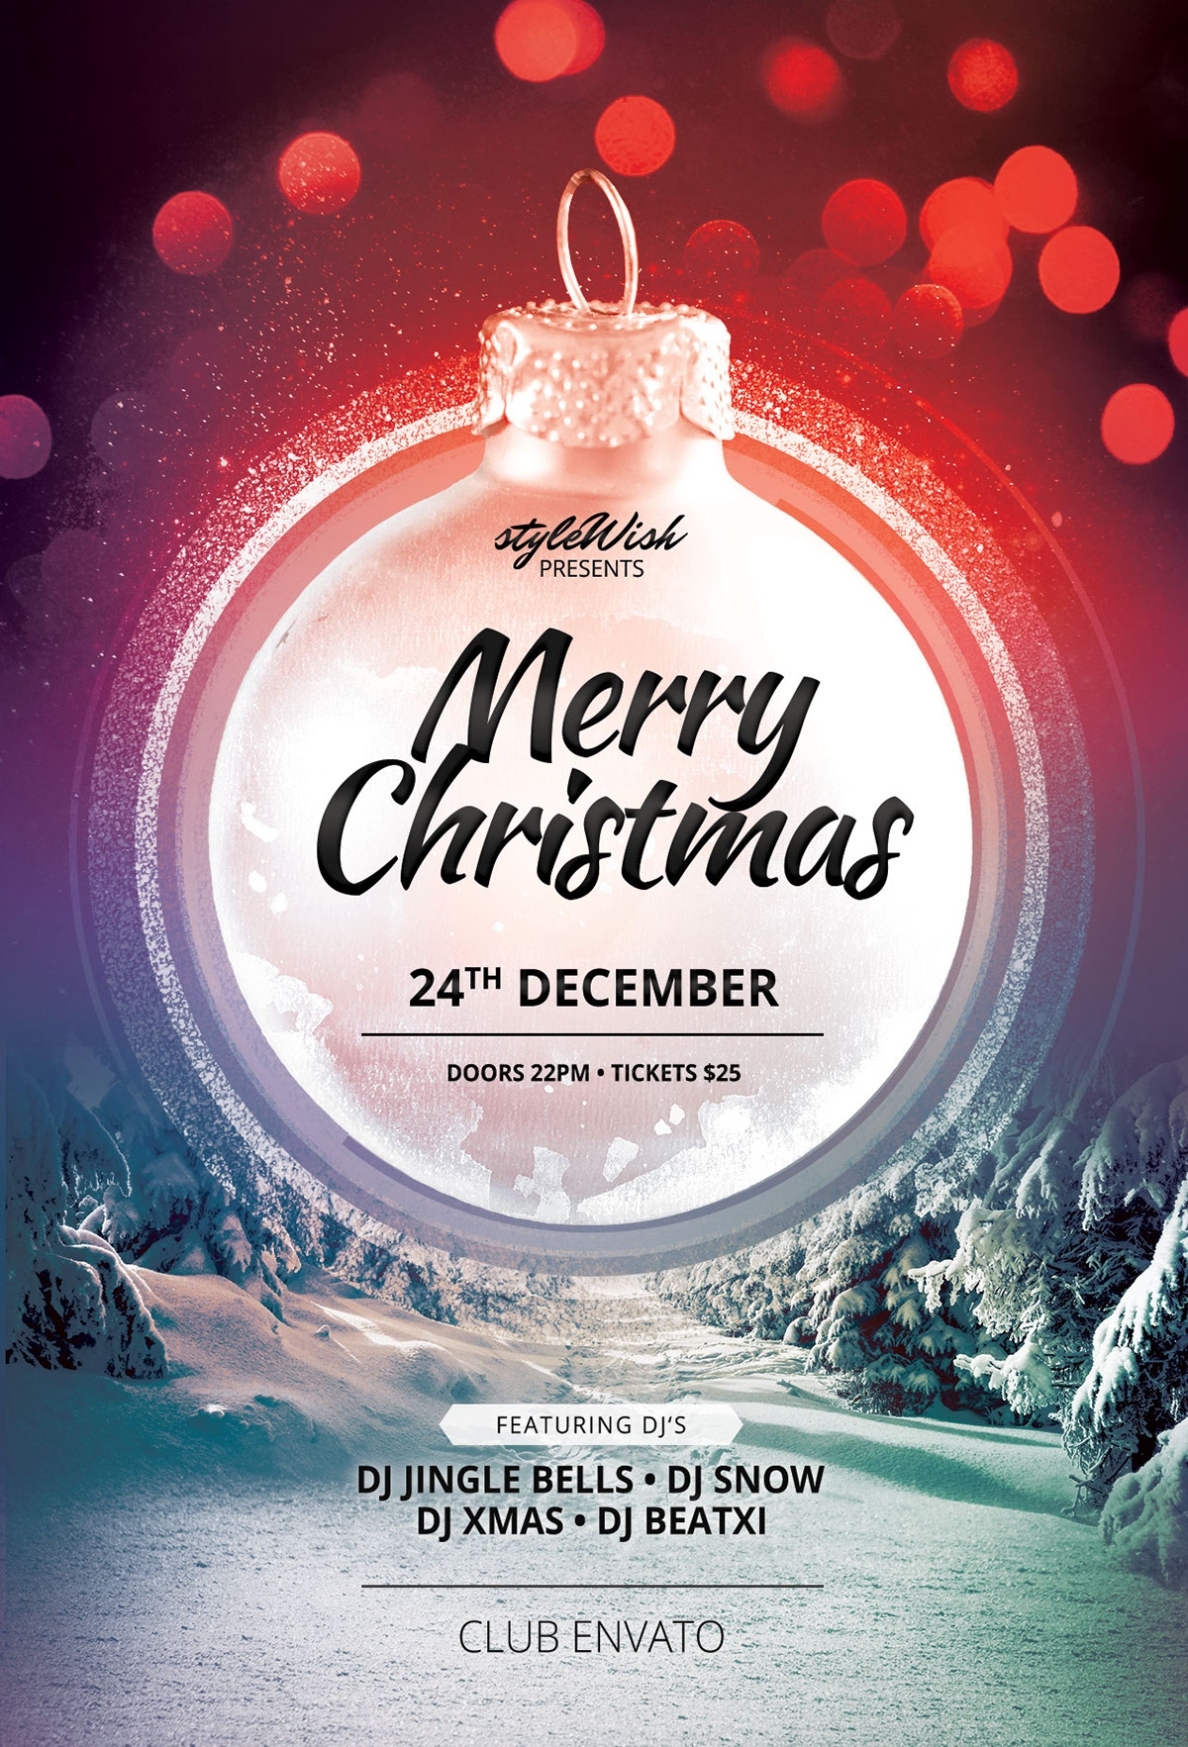 Merry Christmas Flyer Template On Behance In Free Holiday Party Flyer Templates